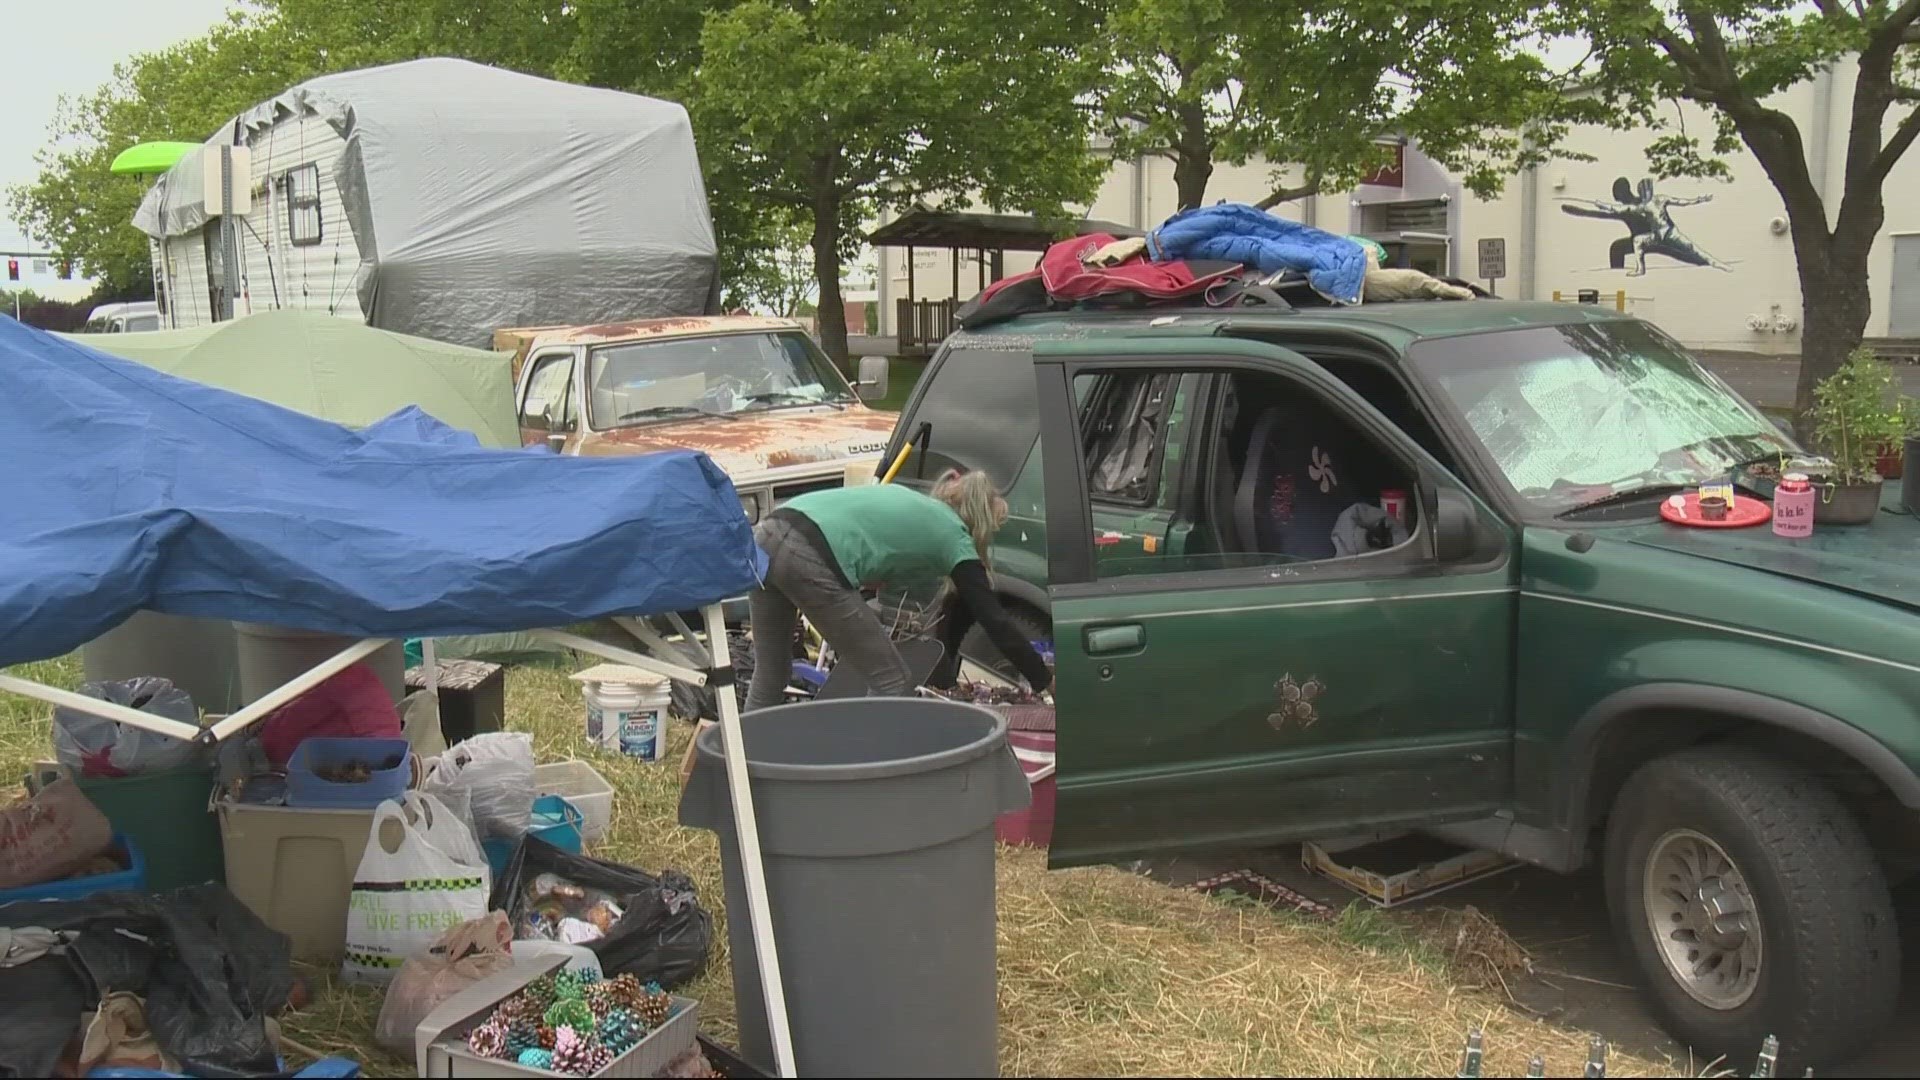 Cities like Hillsboro and Beaverton have long maintained camping bans. They’ve had to adjust those ordinances slightly, making them more similar to Portland’s.